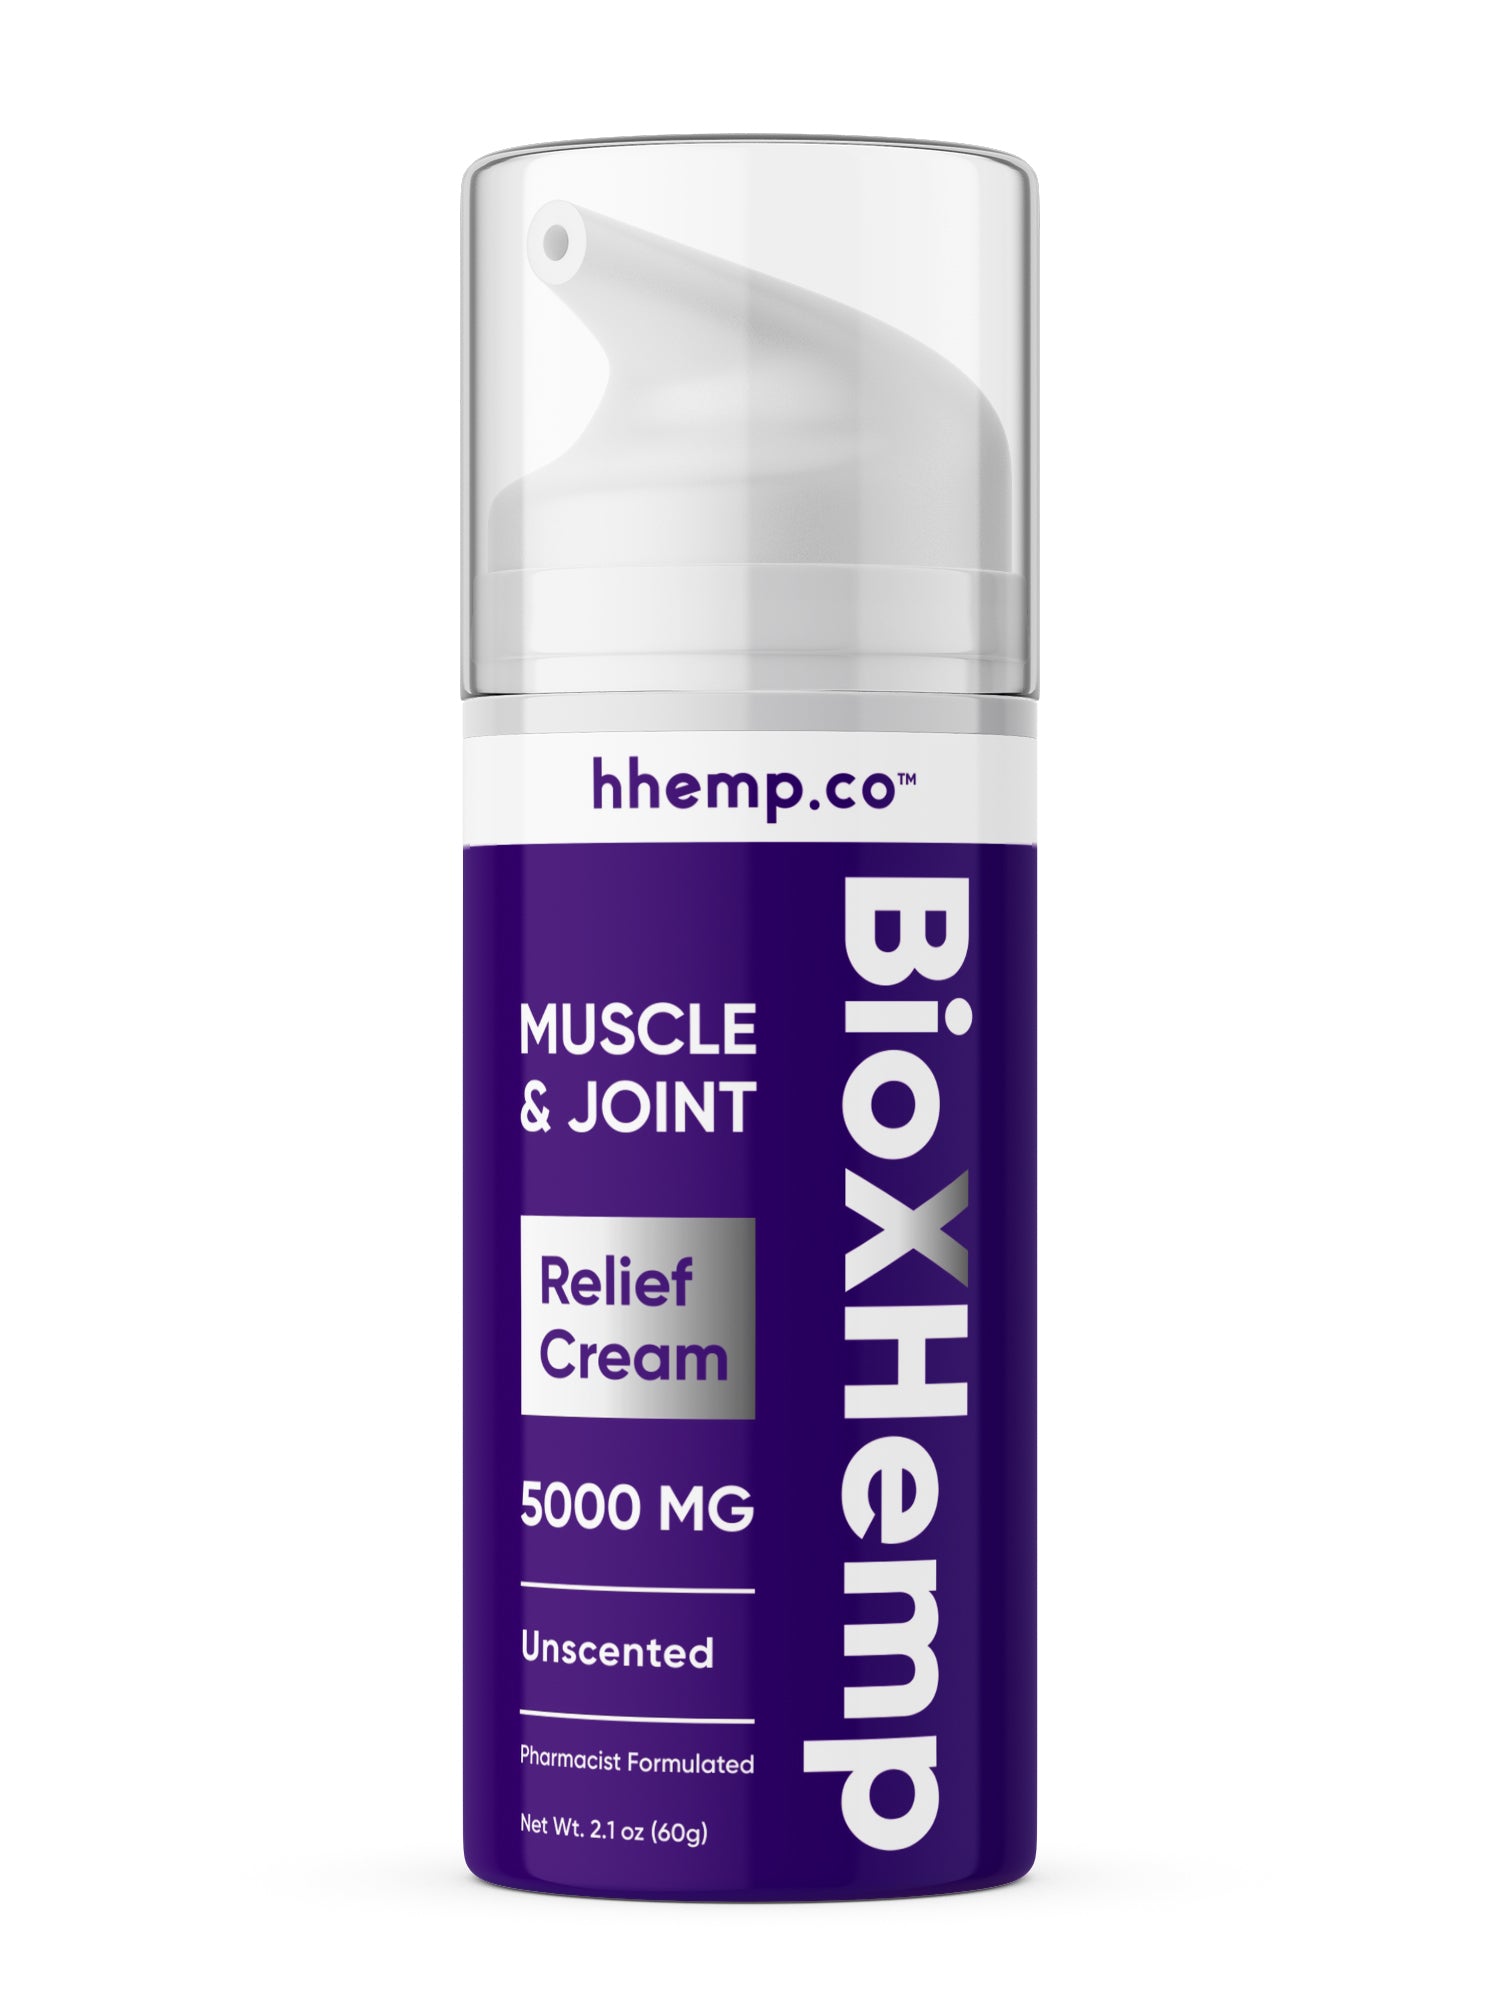 5000mg Muscle & Joint Relief Cream - Unscented